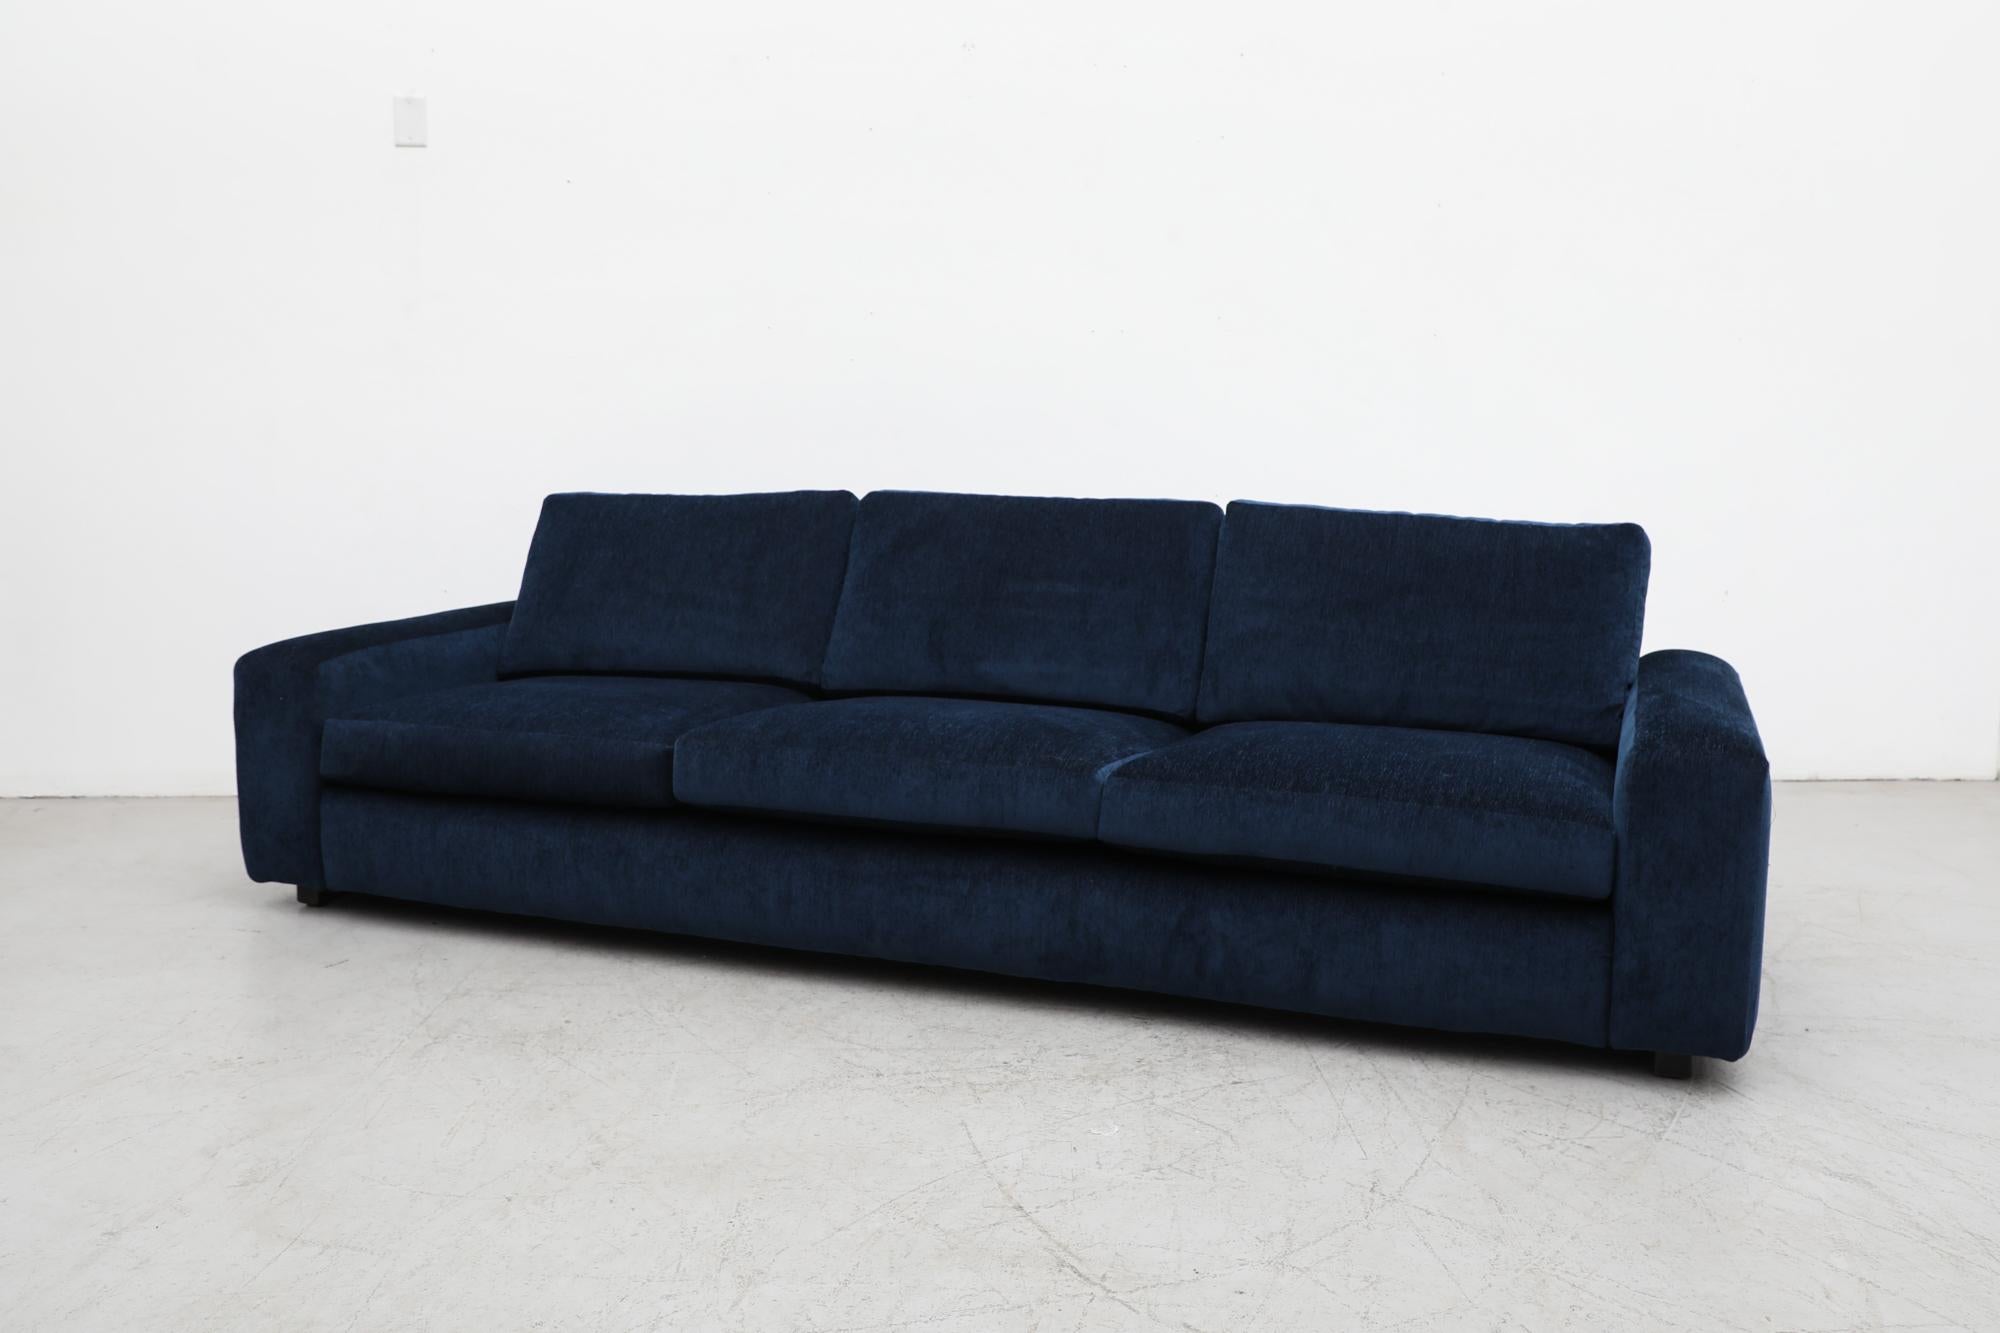 Jan Des Bouvrie designed, newly upholstered XL sapphire blue chenille sofa with deep, low seating perfect for lounging. Some visible markings to wood feet consistent with its age and use but otherwise impressive condition. Big and comfy!